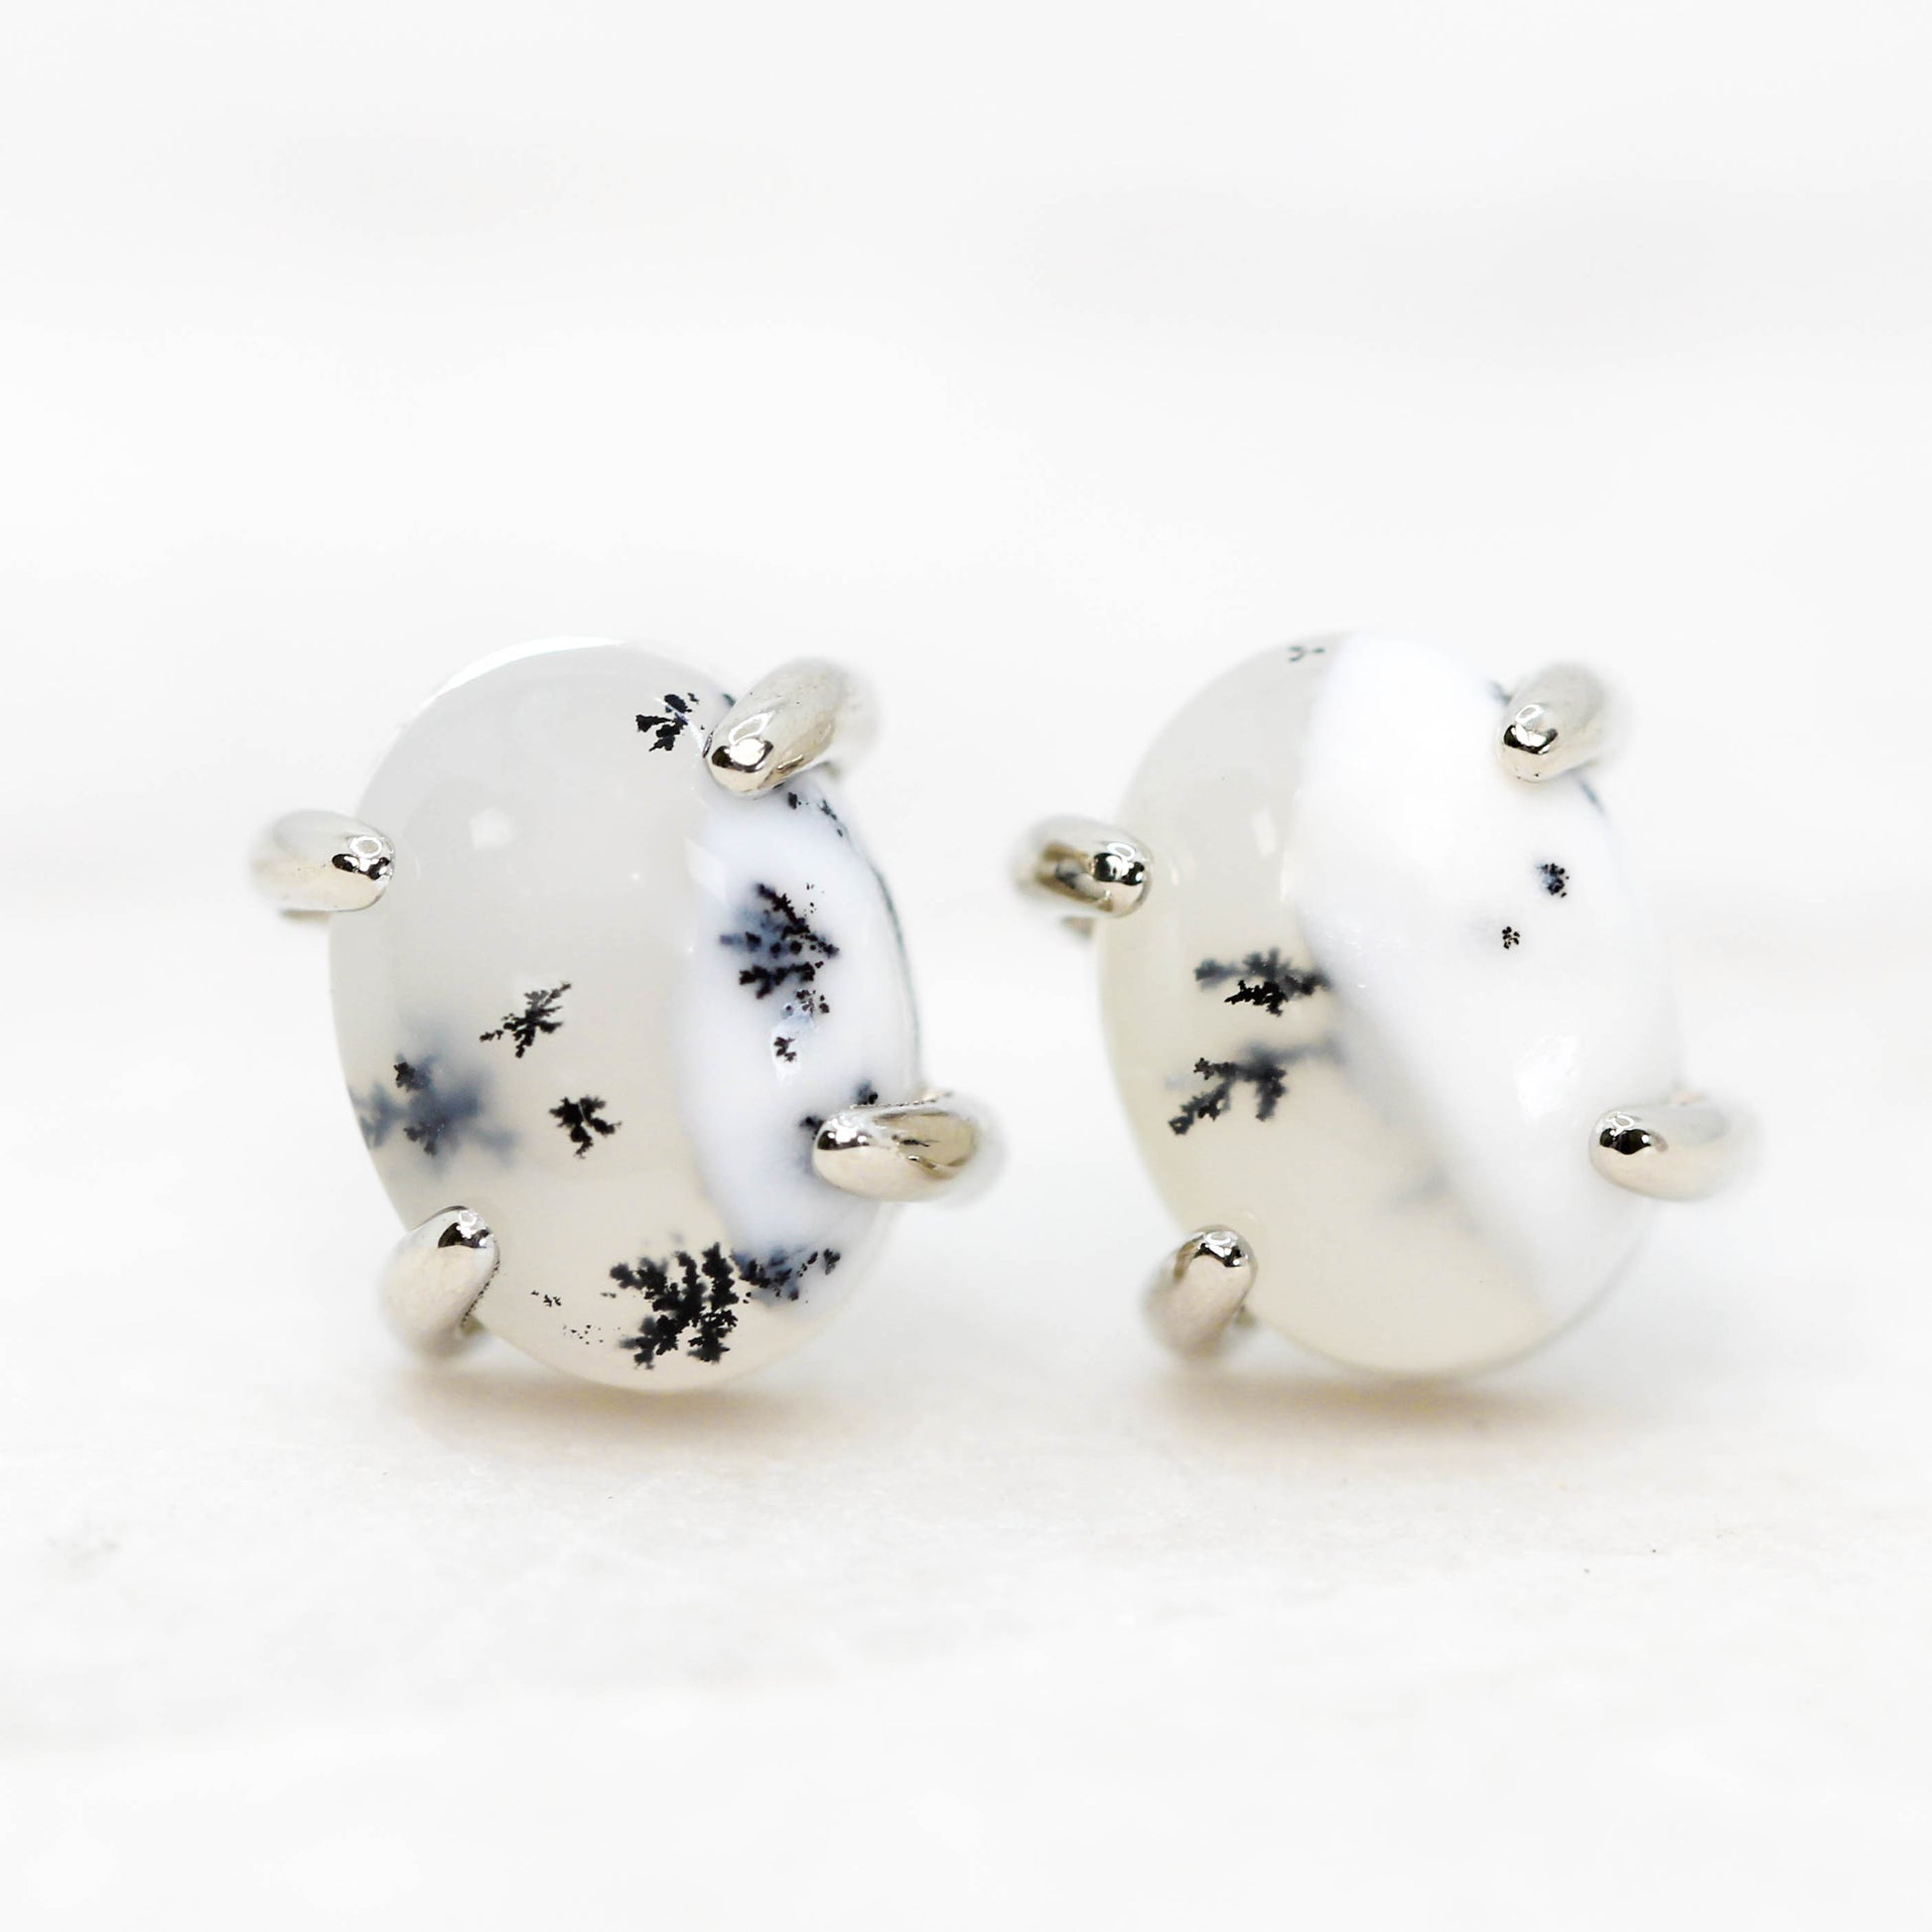 Oval White Dendritic Opal Earrings - Your Choice of 14k Gold - Midwinter Co. Alternative Bridal Rings and Modern Fine Jewelry